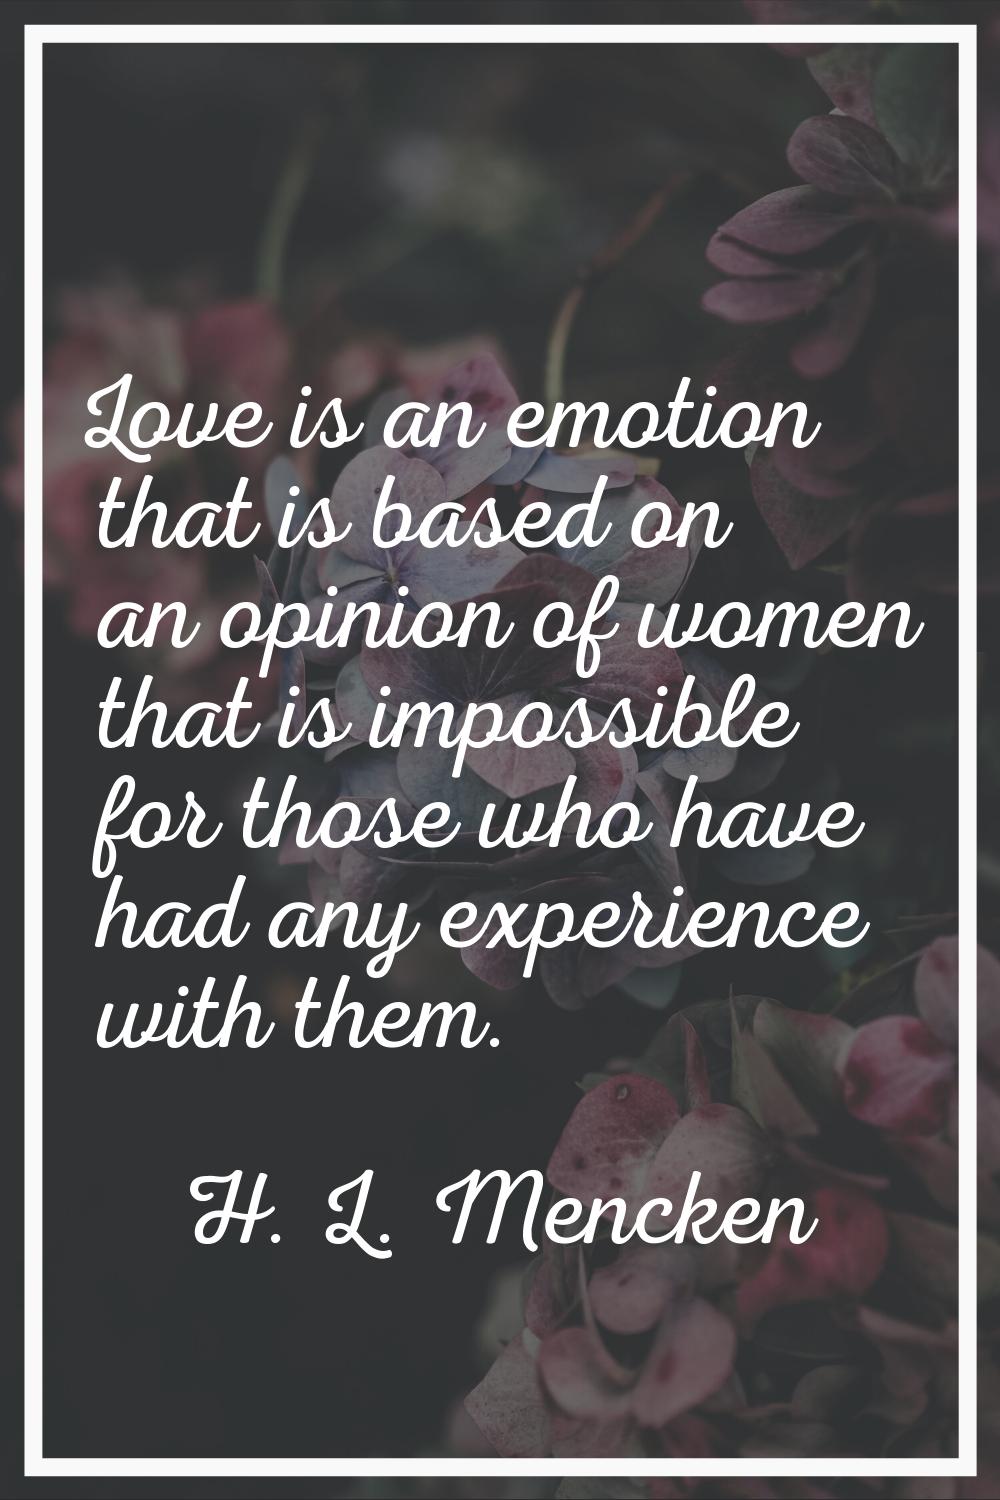 Love is an emotion that is based on an opinion of women that is impossible for those who have had a